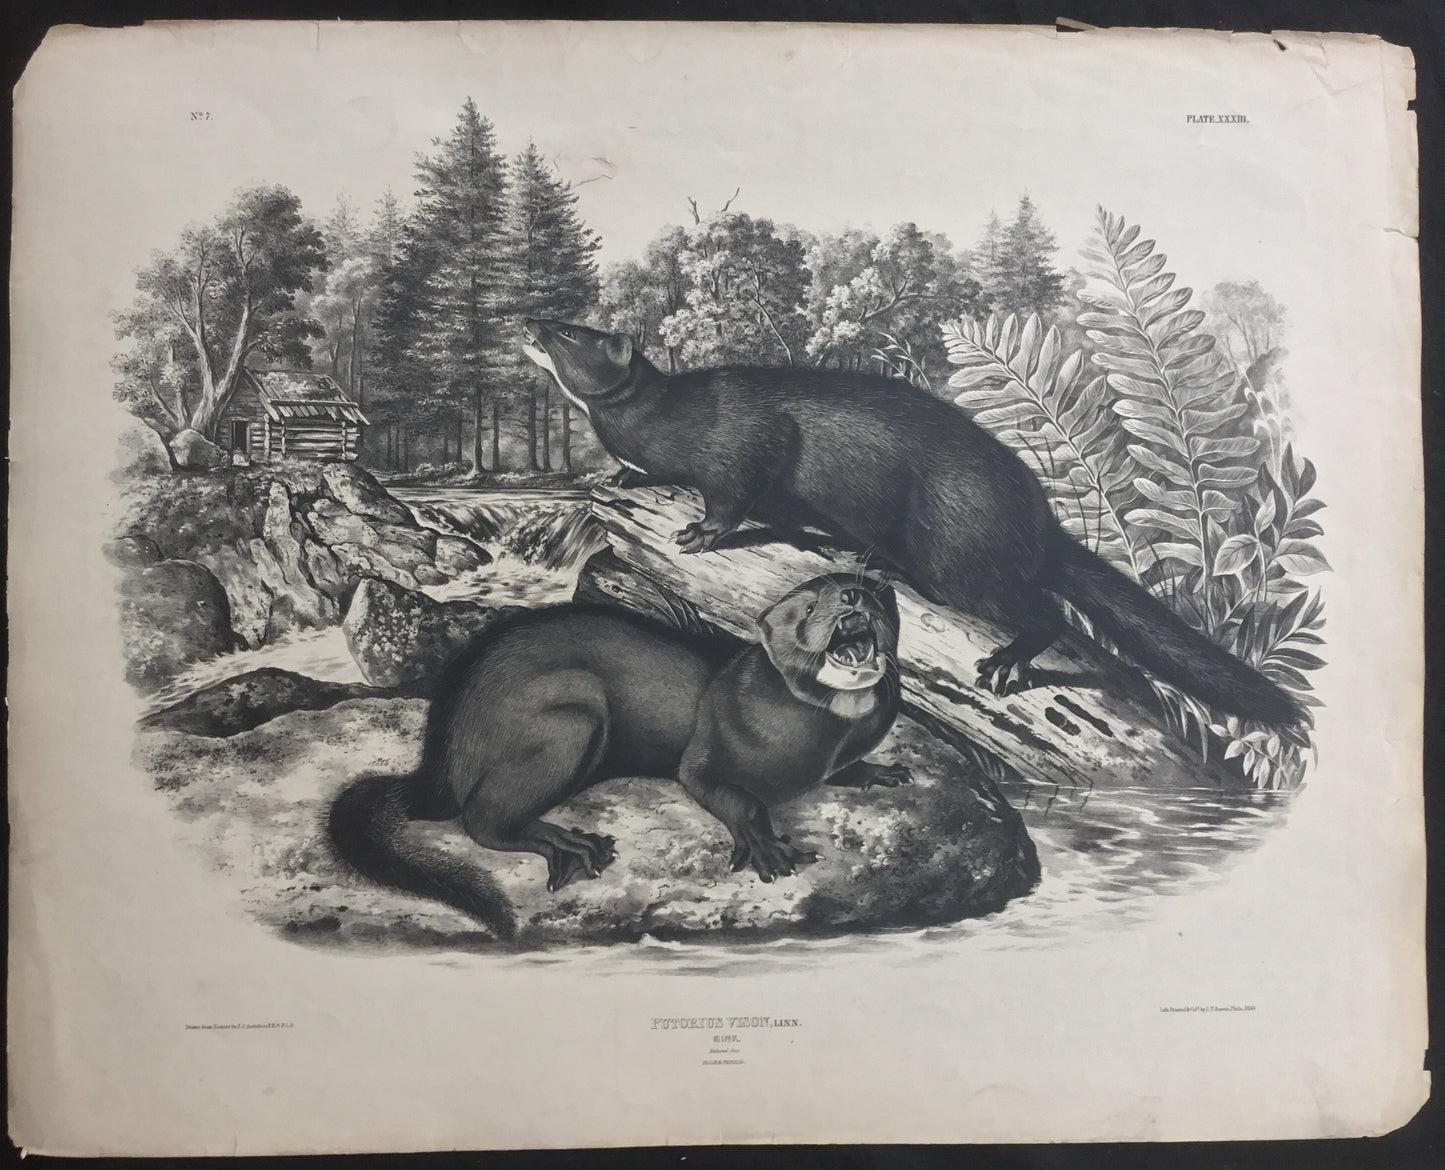 Lord-Hopkins Collection. Test sheet from Bowen's Imperial Quadrupeds. The Mink.